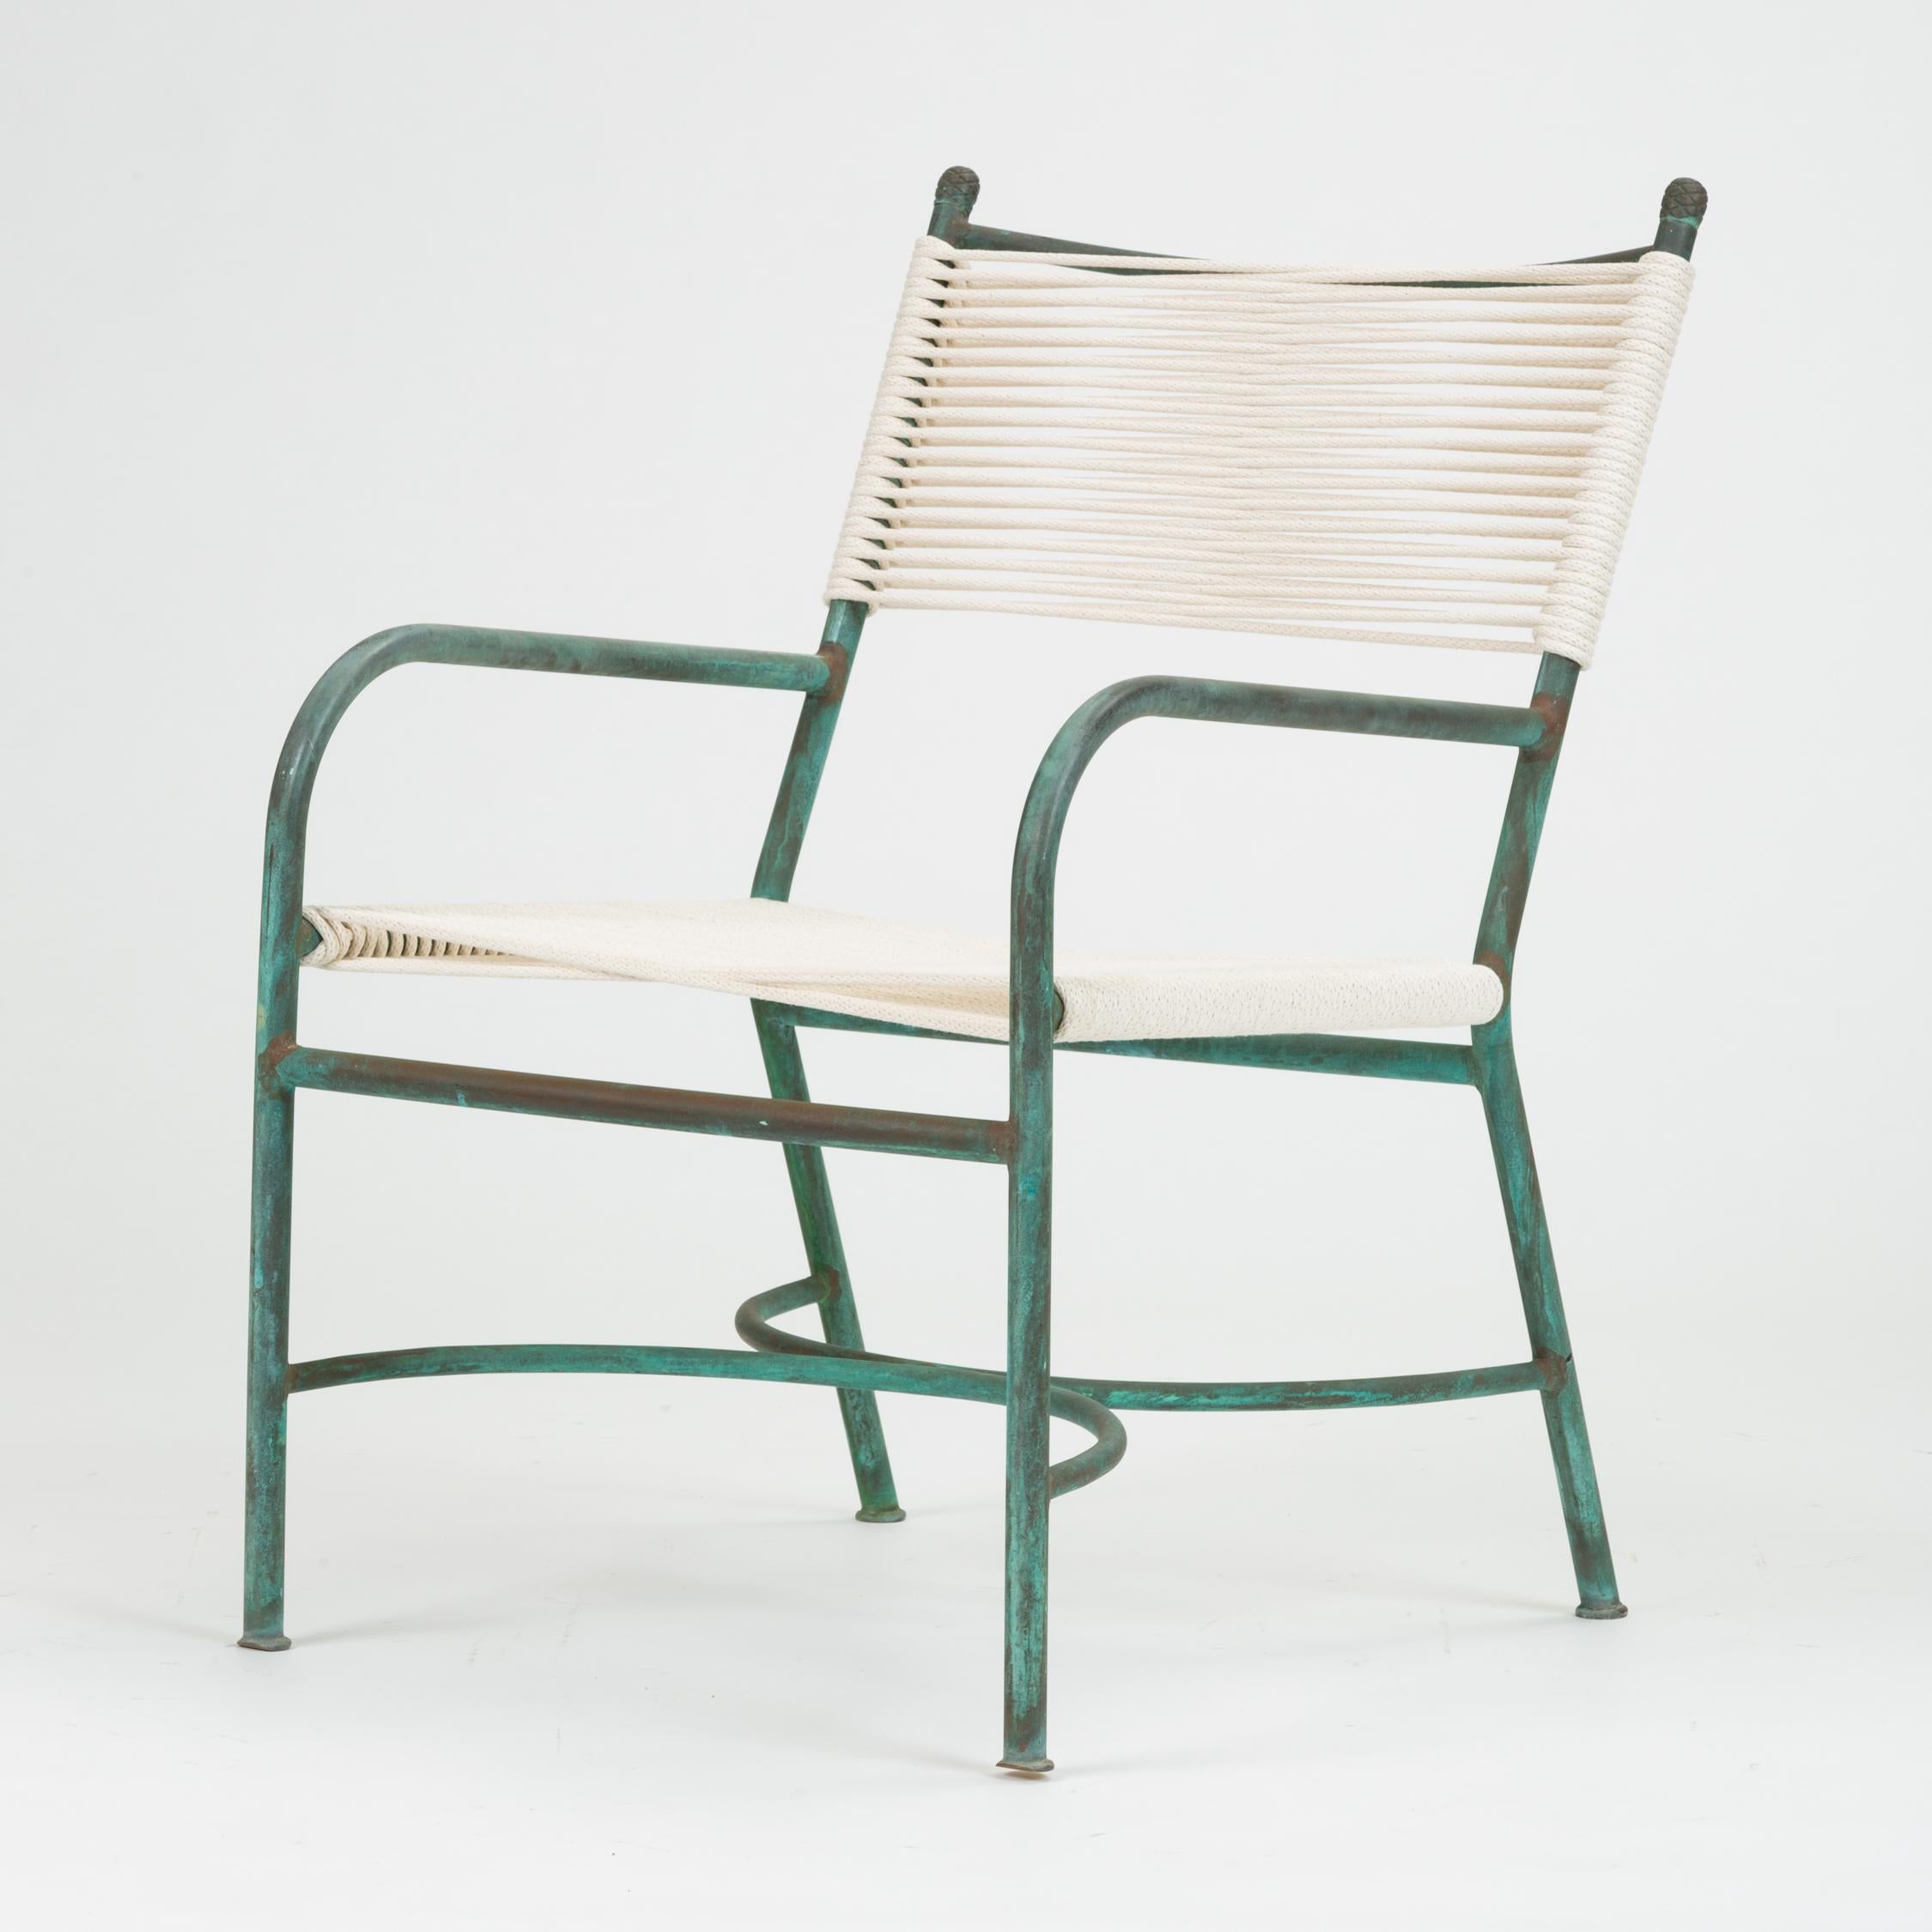 An early California-made bronze patio lounge chair by Walter Lamb antecedent, Robert Lewis. The bronze tubing in this example is very slender, sculpted into a chair with an angled backrest, comparatively low-set arms, and the C-shaped supports that